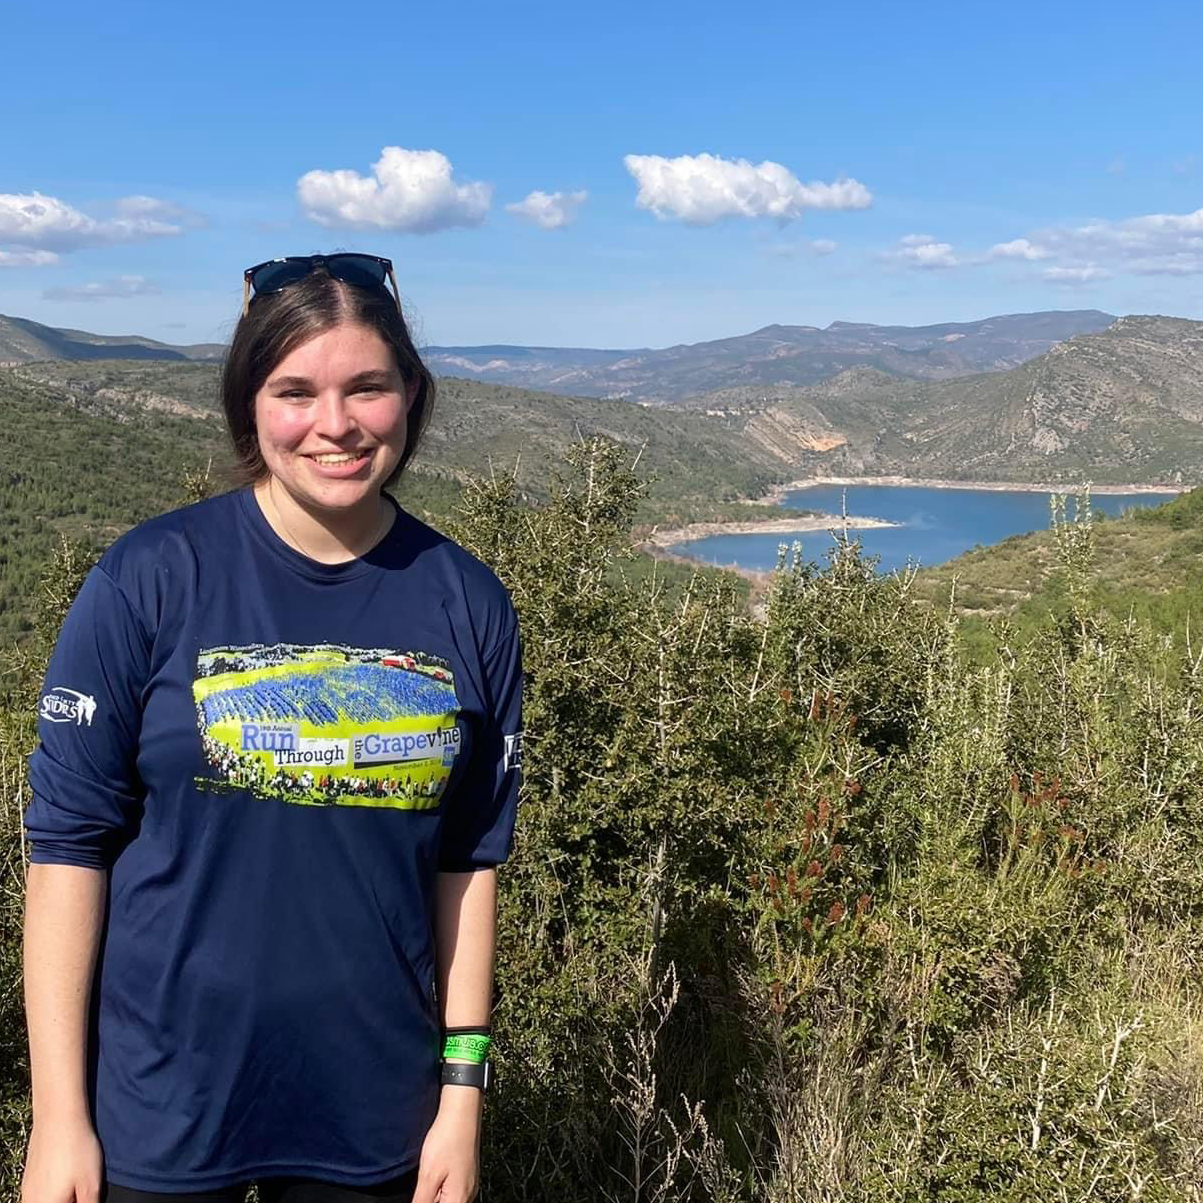 Ellie smiles at the camera as she stands in an outdoor setting in Spain. A body of water and rolling hills are visible in the background